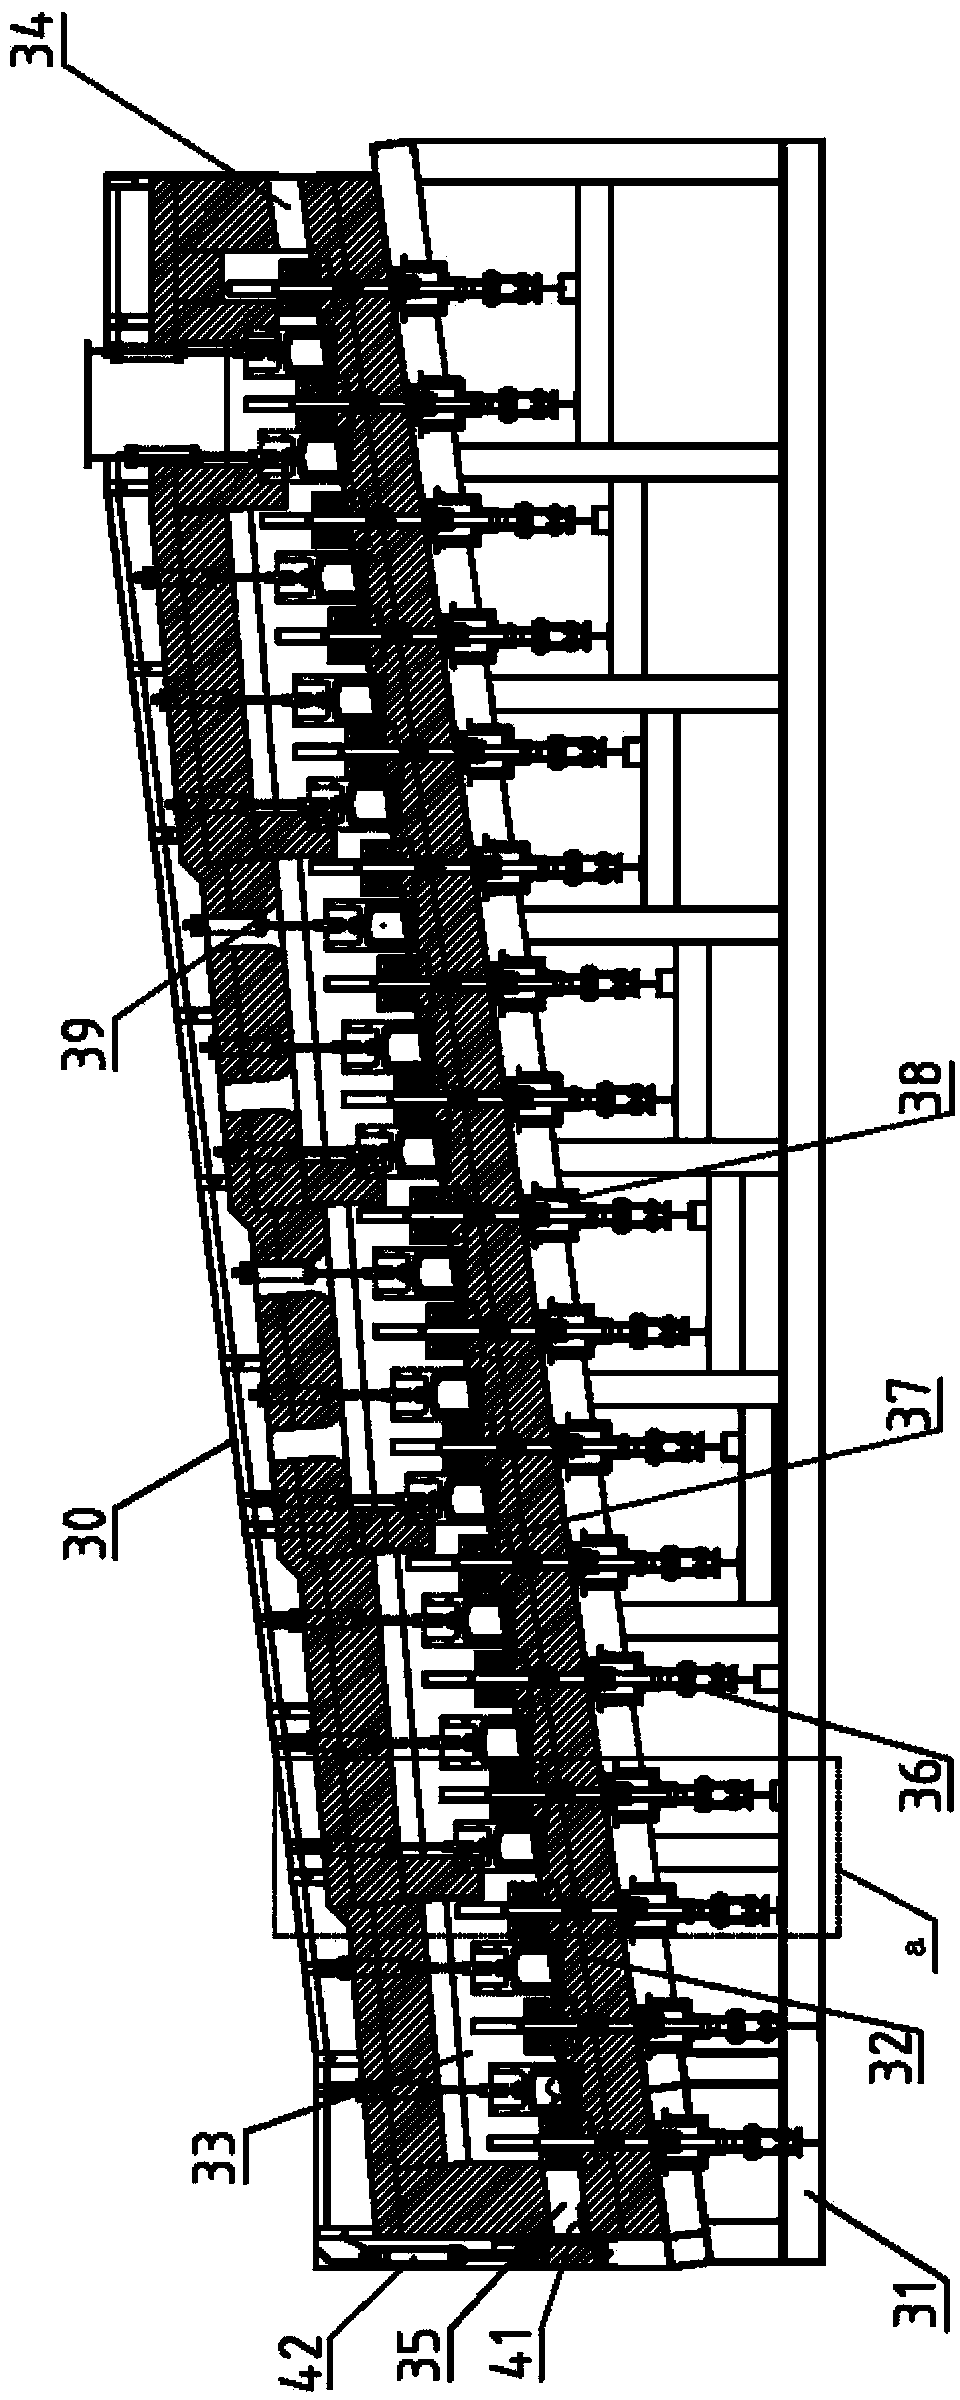 Control structure of heating chamber of steel ball reheating furnace